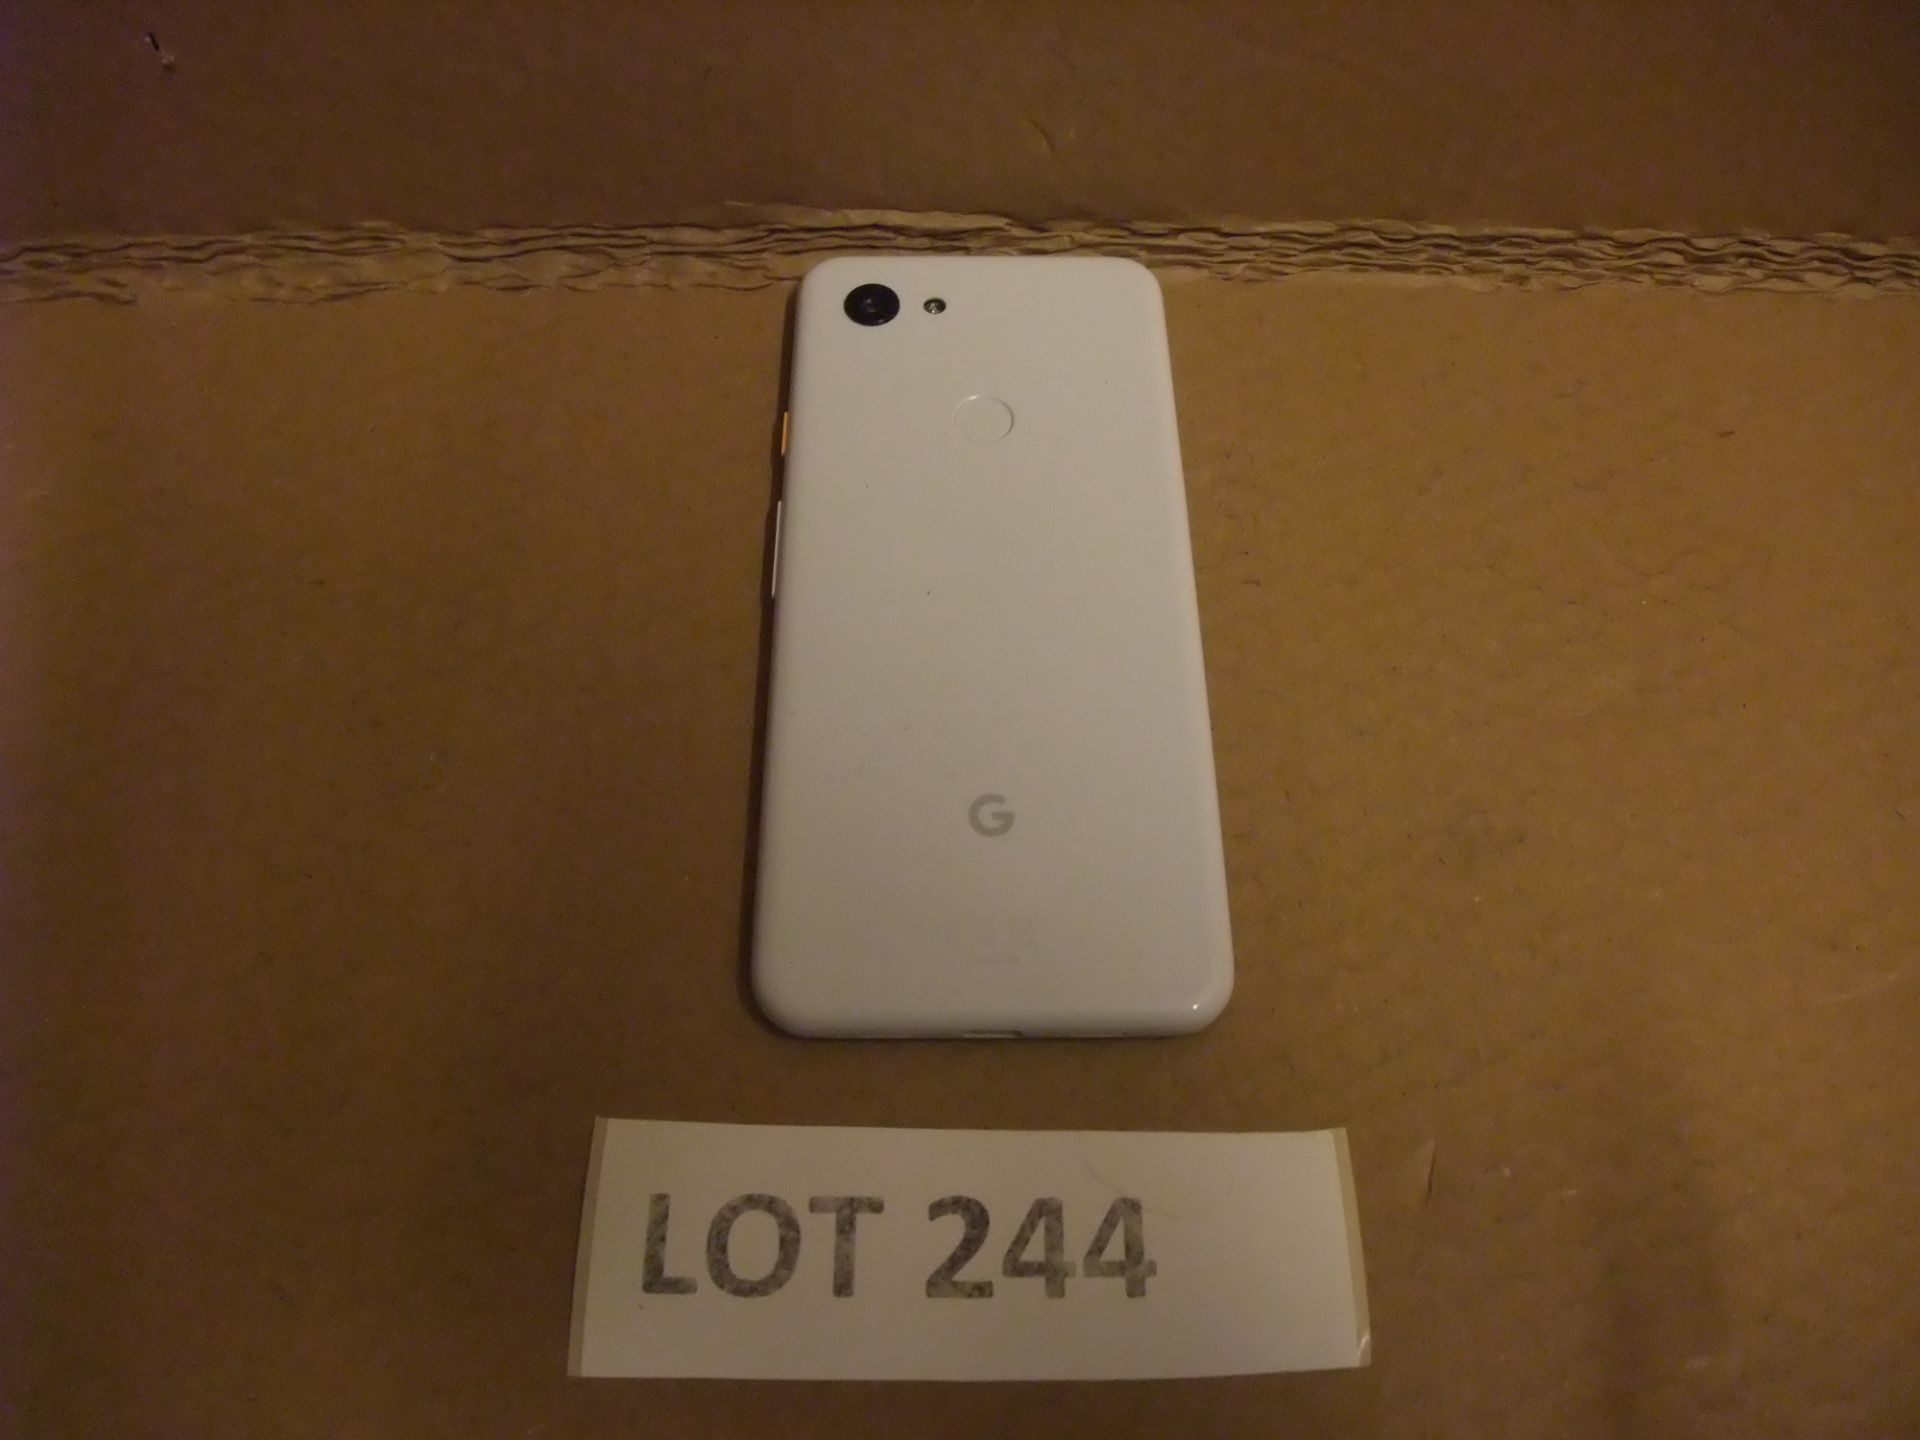 Google Pixel 3a (black) Android Phone - 64GbPlease read the following important notes:- All lots - Image 2 of 4